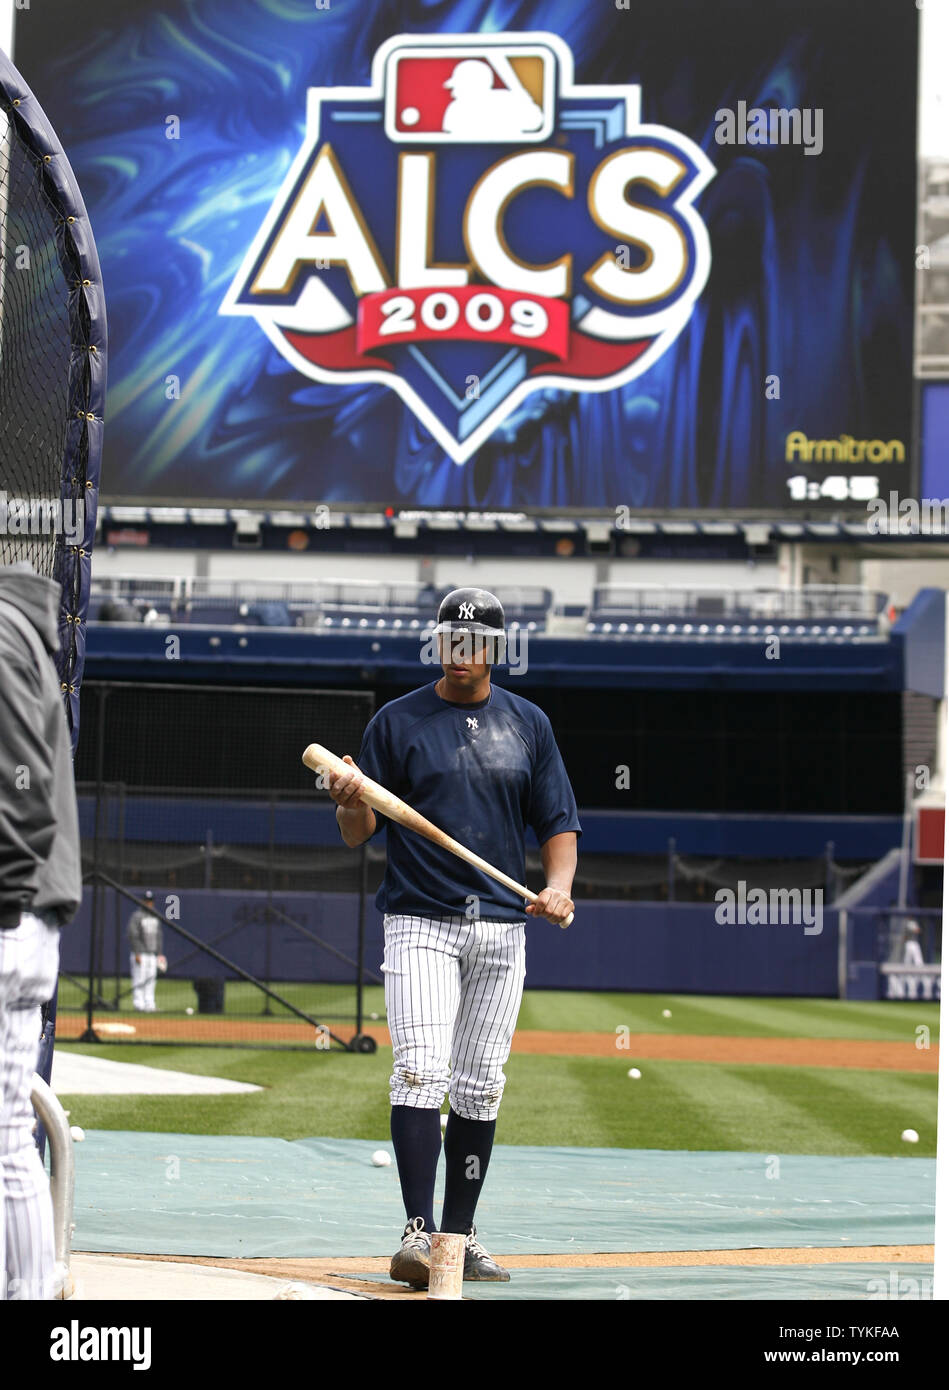 New York Yankees Alex Rodriguez takes batting practice preparing for game 1  of the ALCS at Yankee Stadium in New York City on October 14, 2009.  UPI/John Angelillo Stock Photo - Alamy